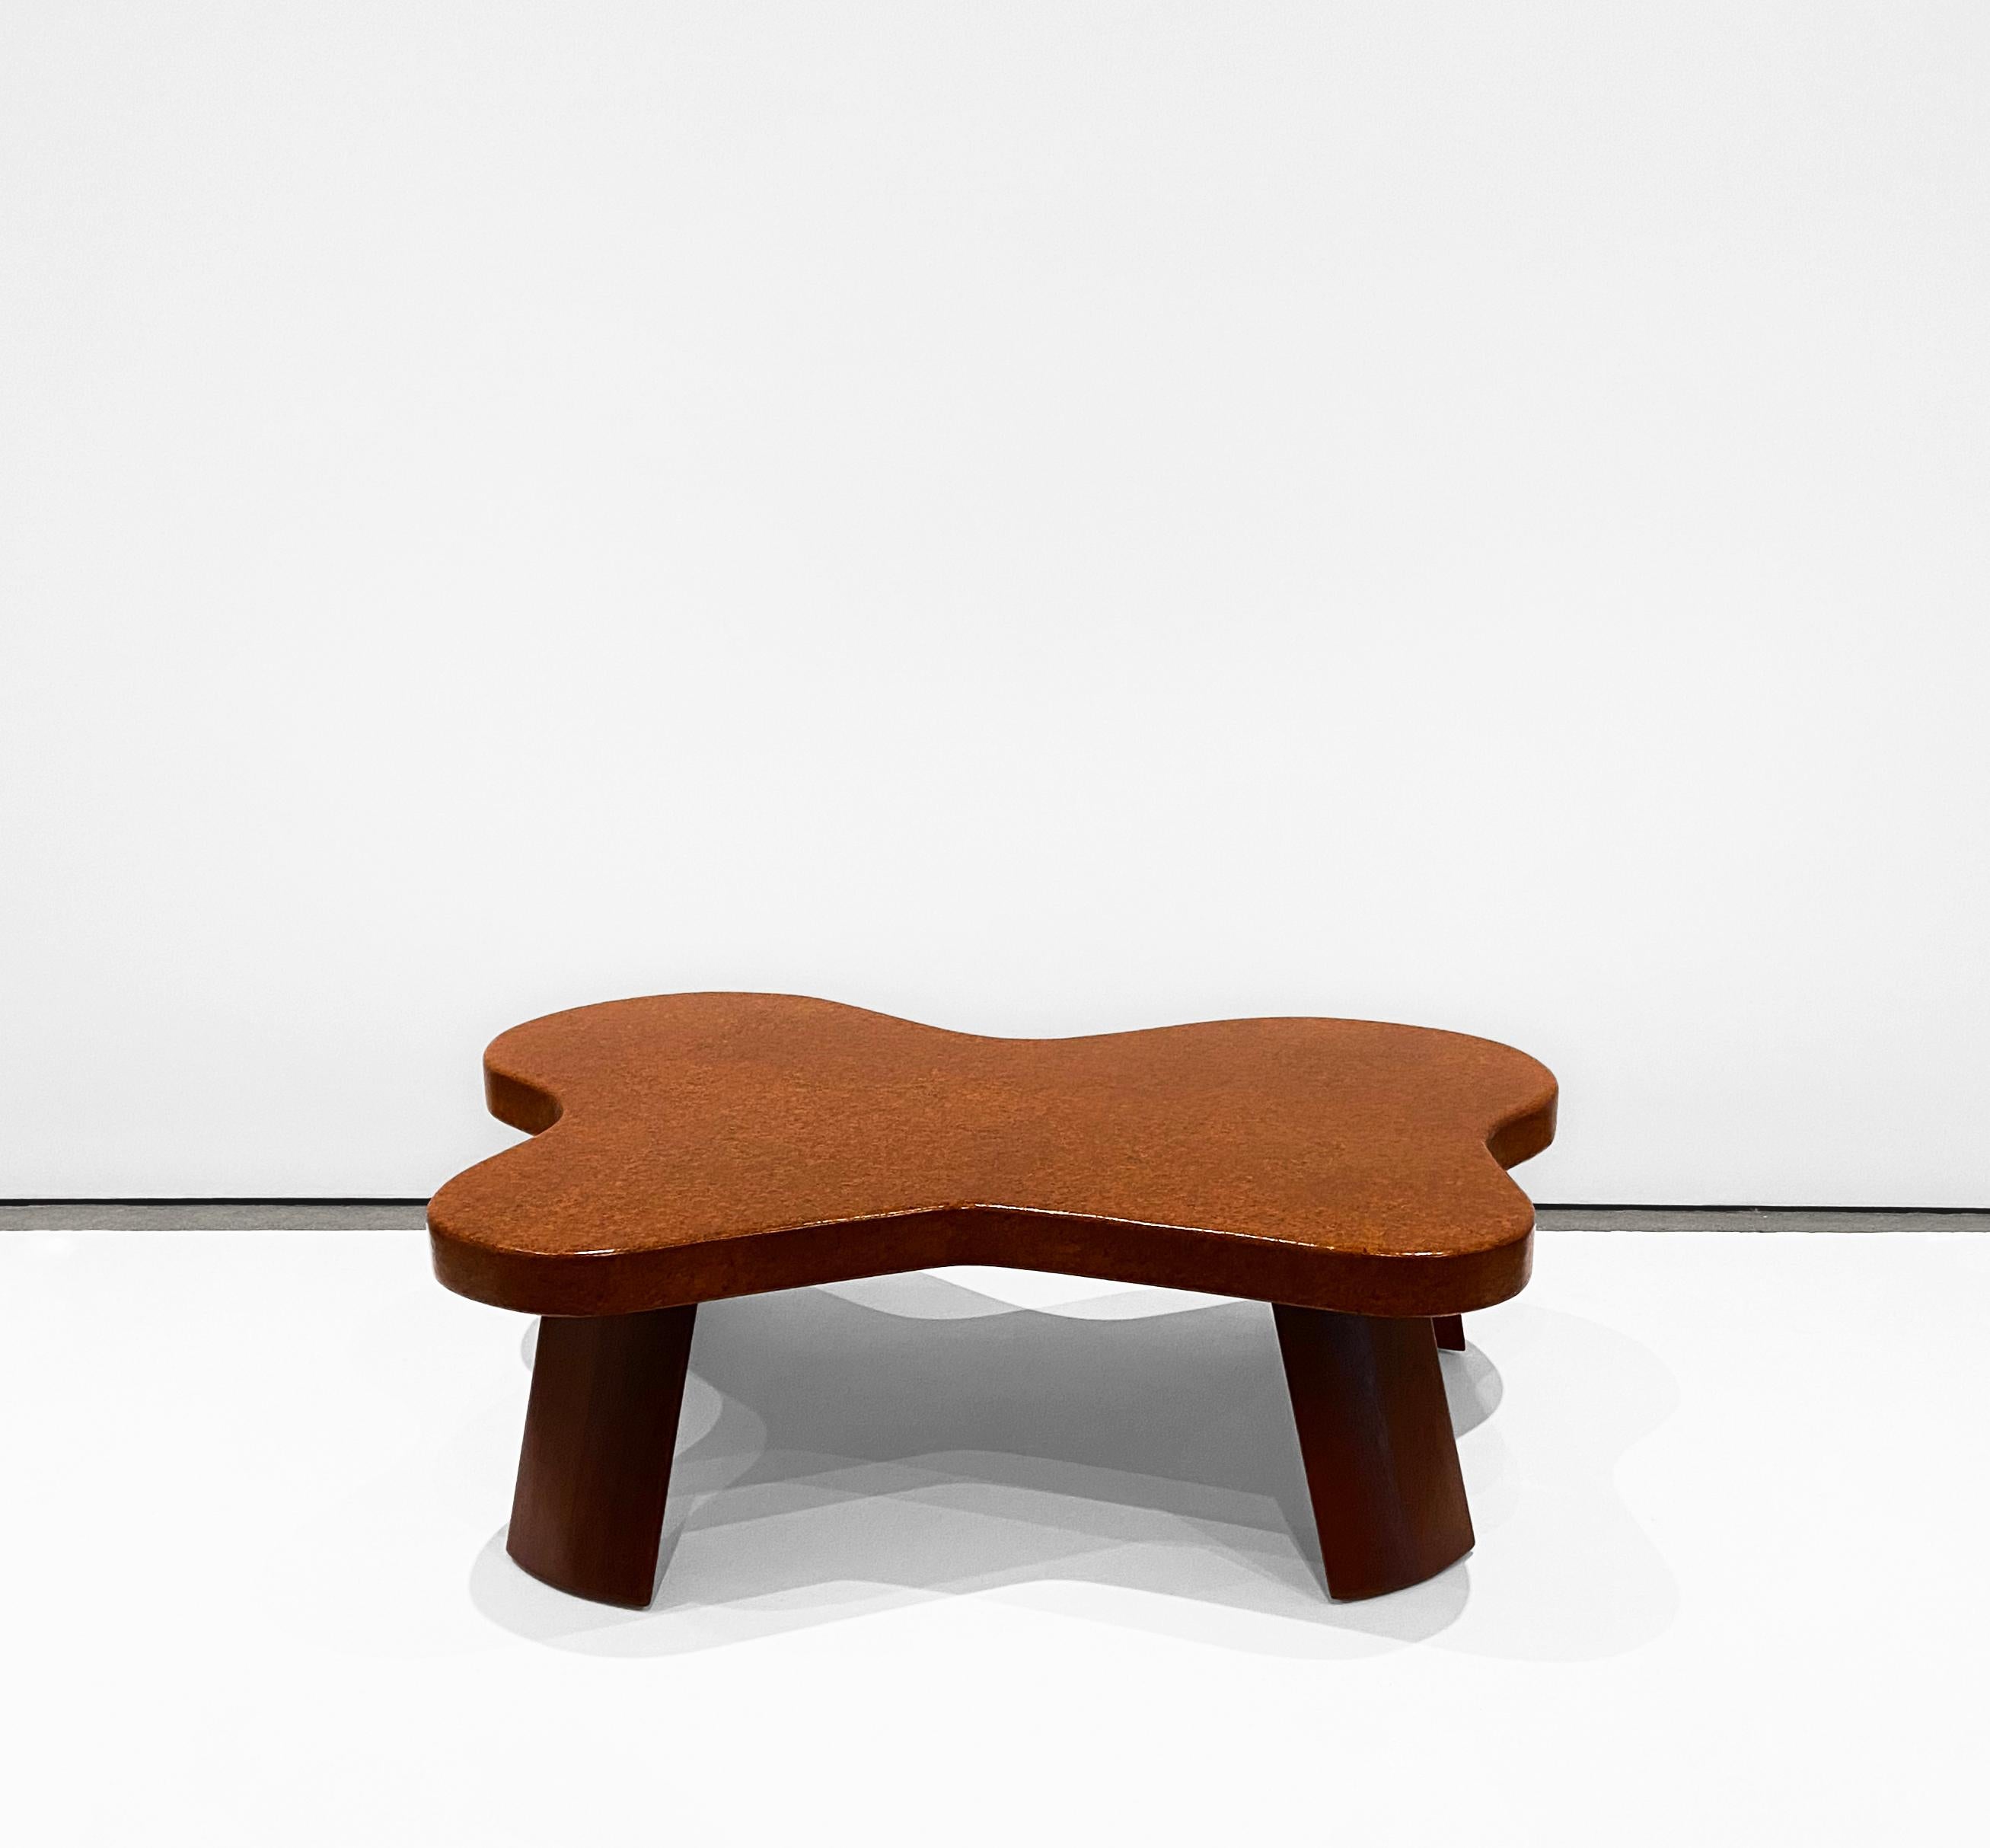 Paul T. Frankl
'Cork' table, Model 5005
Designed for Johnson Furniture Company (Grand Rapids, Michigan)
c. 1950s

Paul Frankl’s cork furniture pieces are among his longest-lasting contributions to American modernism and are highly sought after